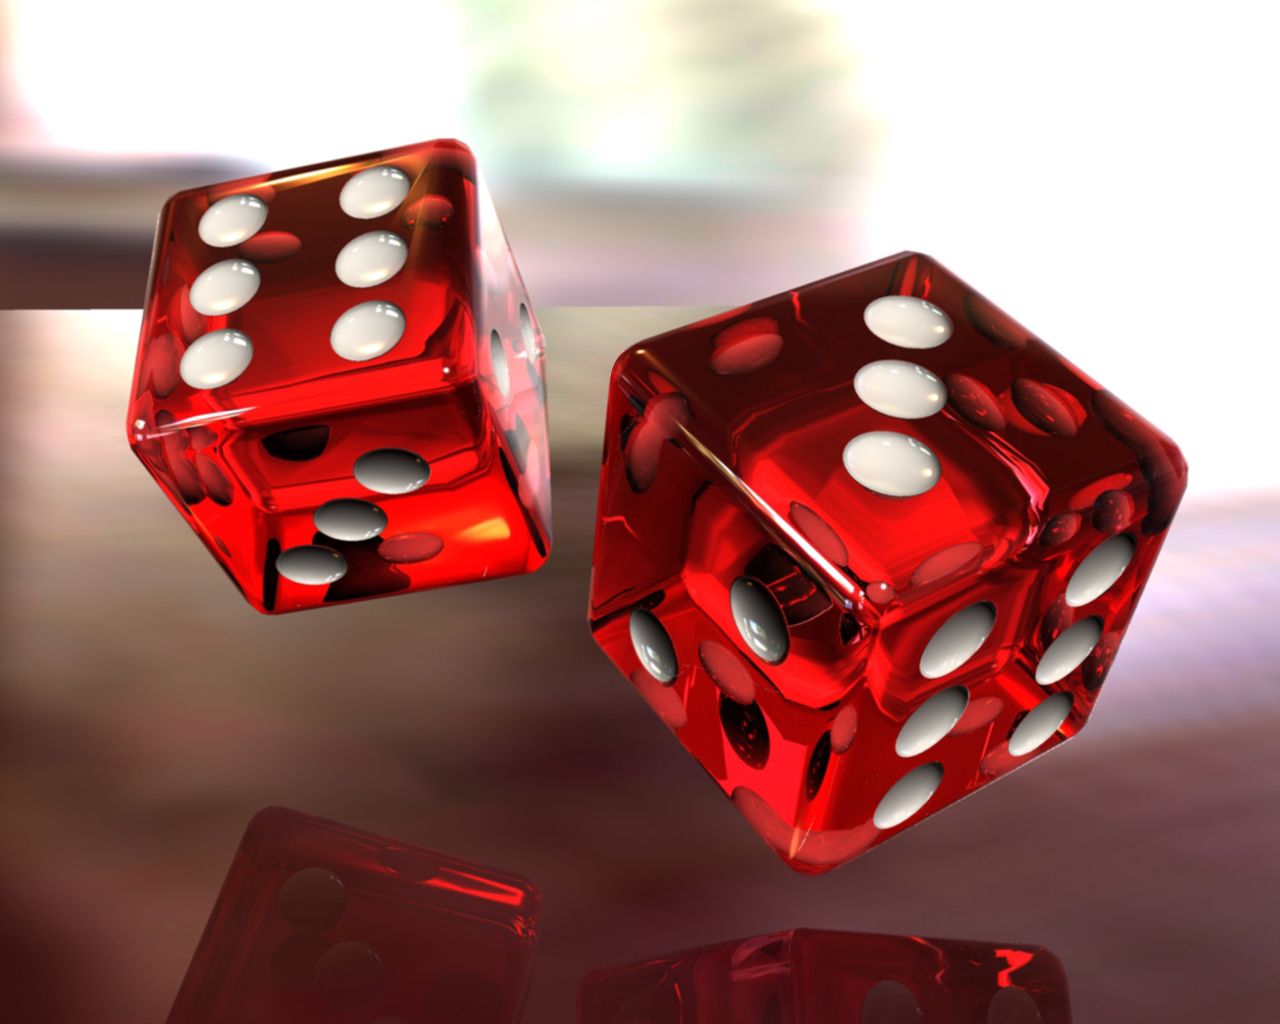 Download Wallpaper 1280x1024 Dice Game Red White Glass Standard 5 4 Hd Background